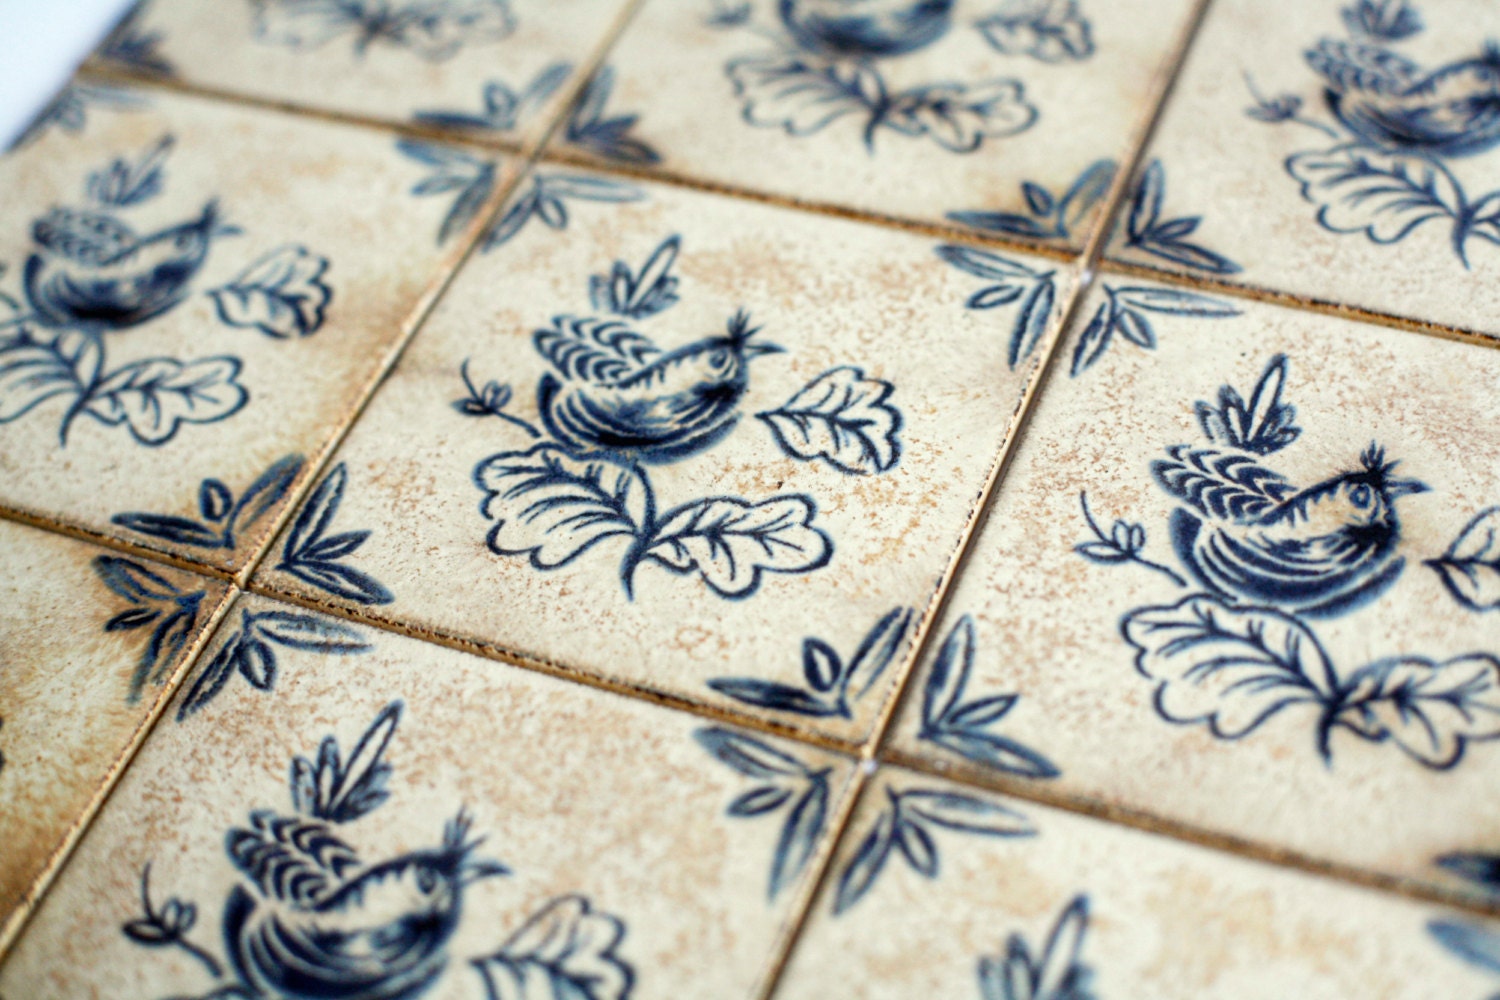 SALE...10 vintage French ceramic tiles by VintageFrenchDecor